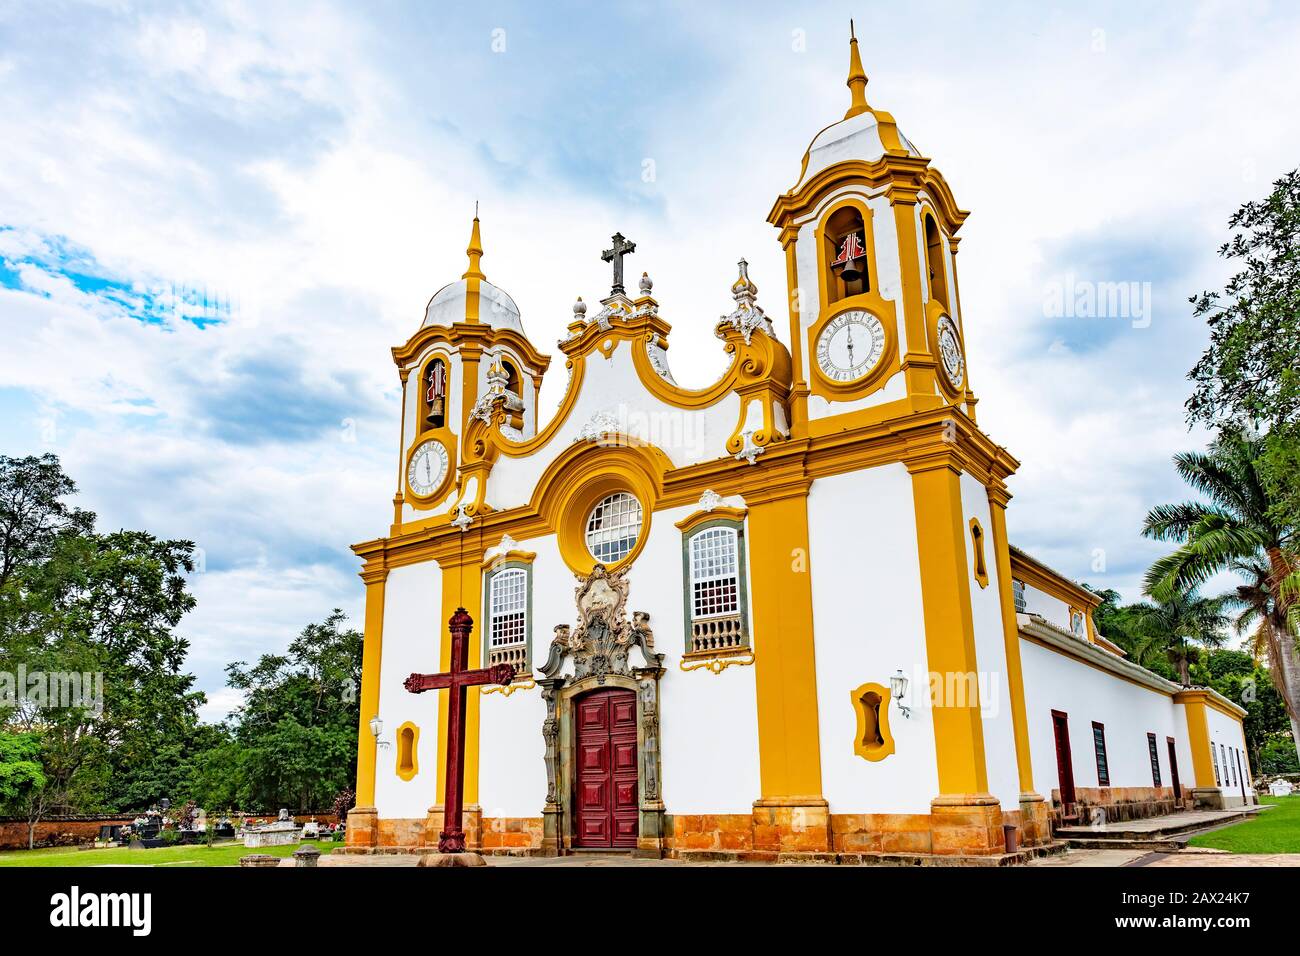 Facade of an old church built in the 18th century in baroque style in the famous city of Tiradentes, Minas Gerais Stock Photo